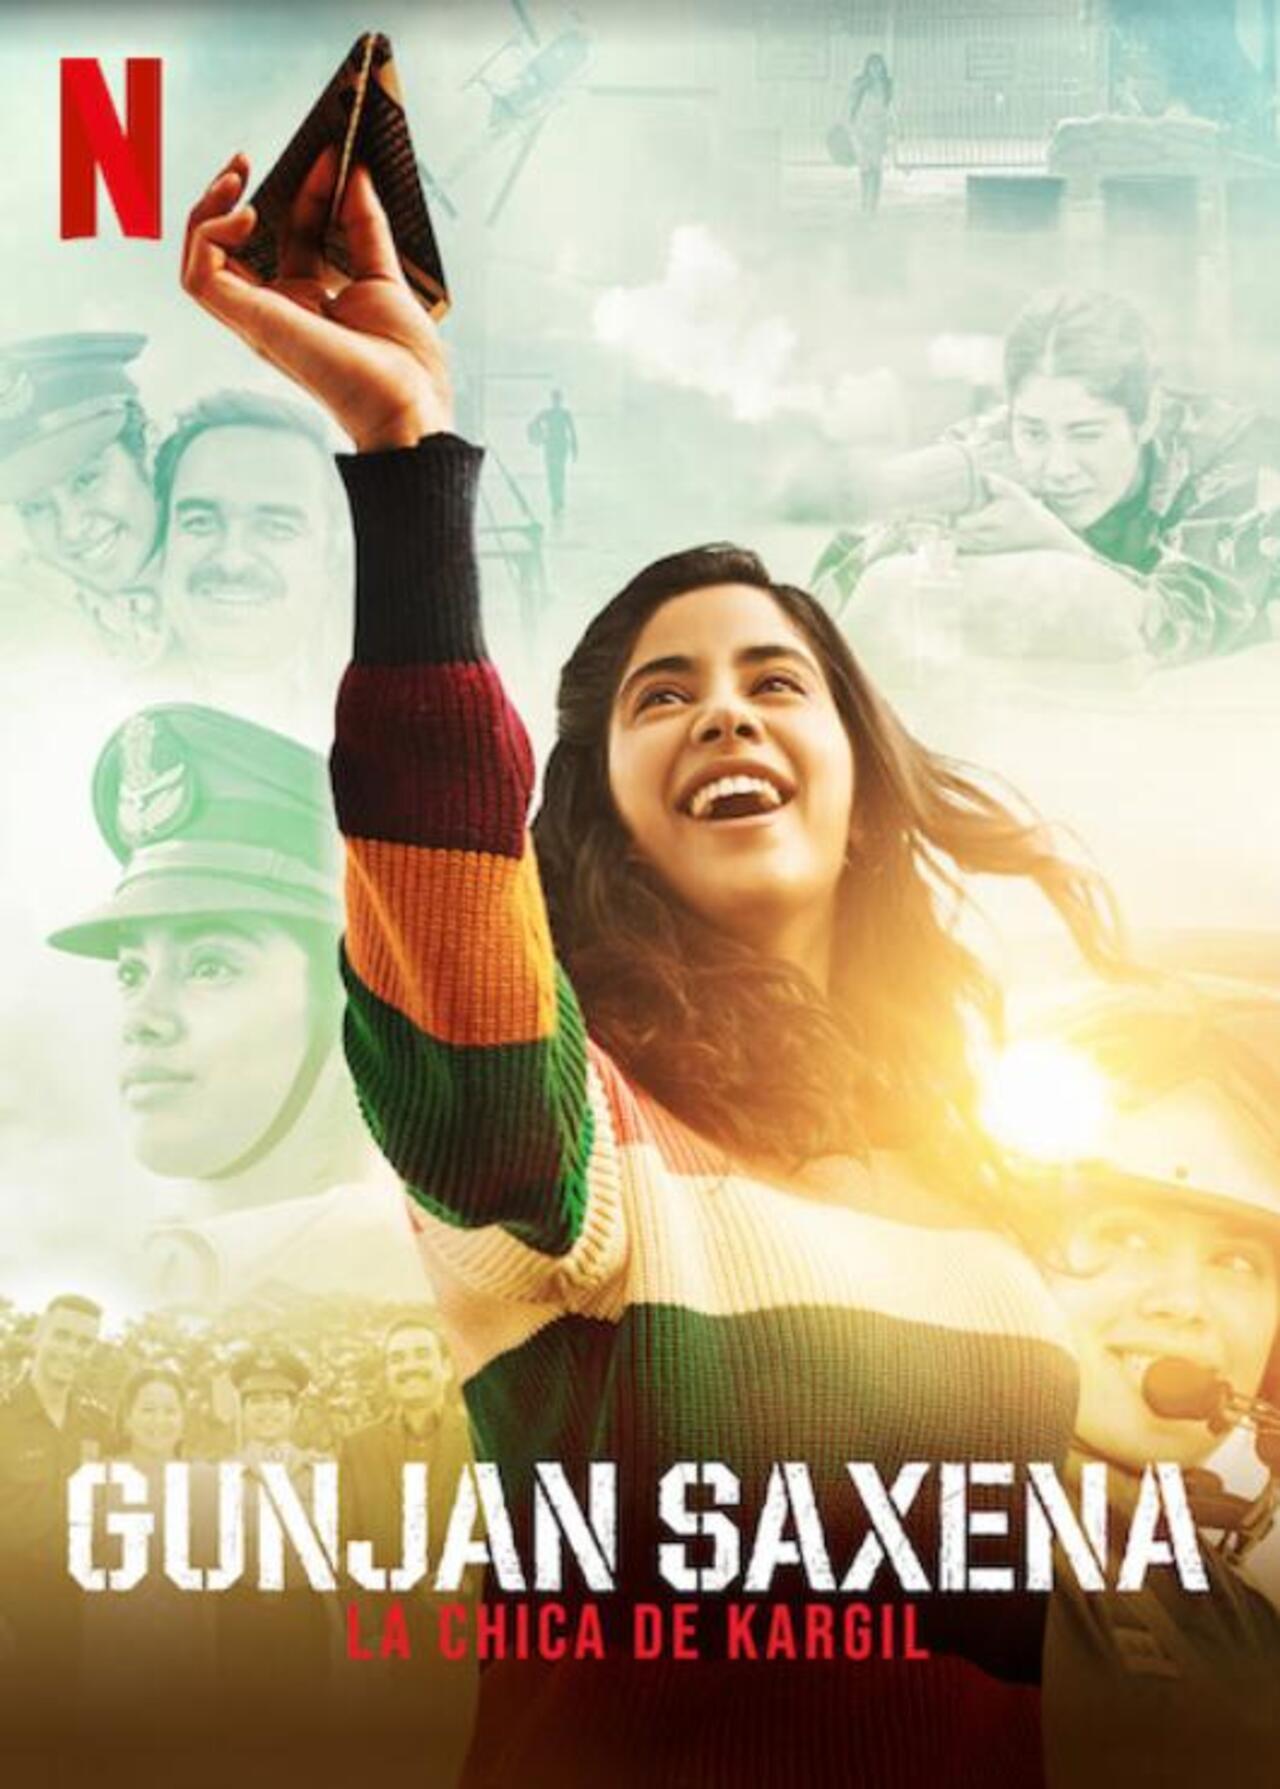  Janhvi Kapoor's biographical drama 'Gunjan Saxena: The Kargil Girl' is based on the first Indian Air Force woman pilot who flew in a war zone during the Kargil war in 1999